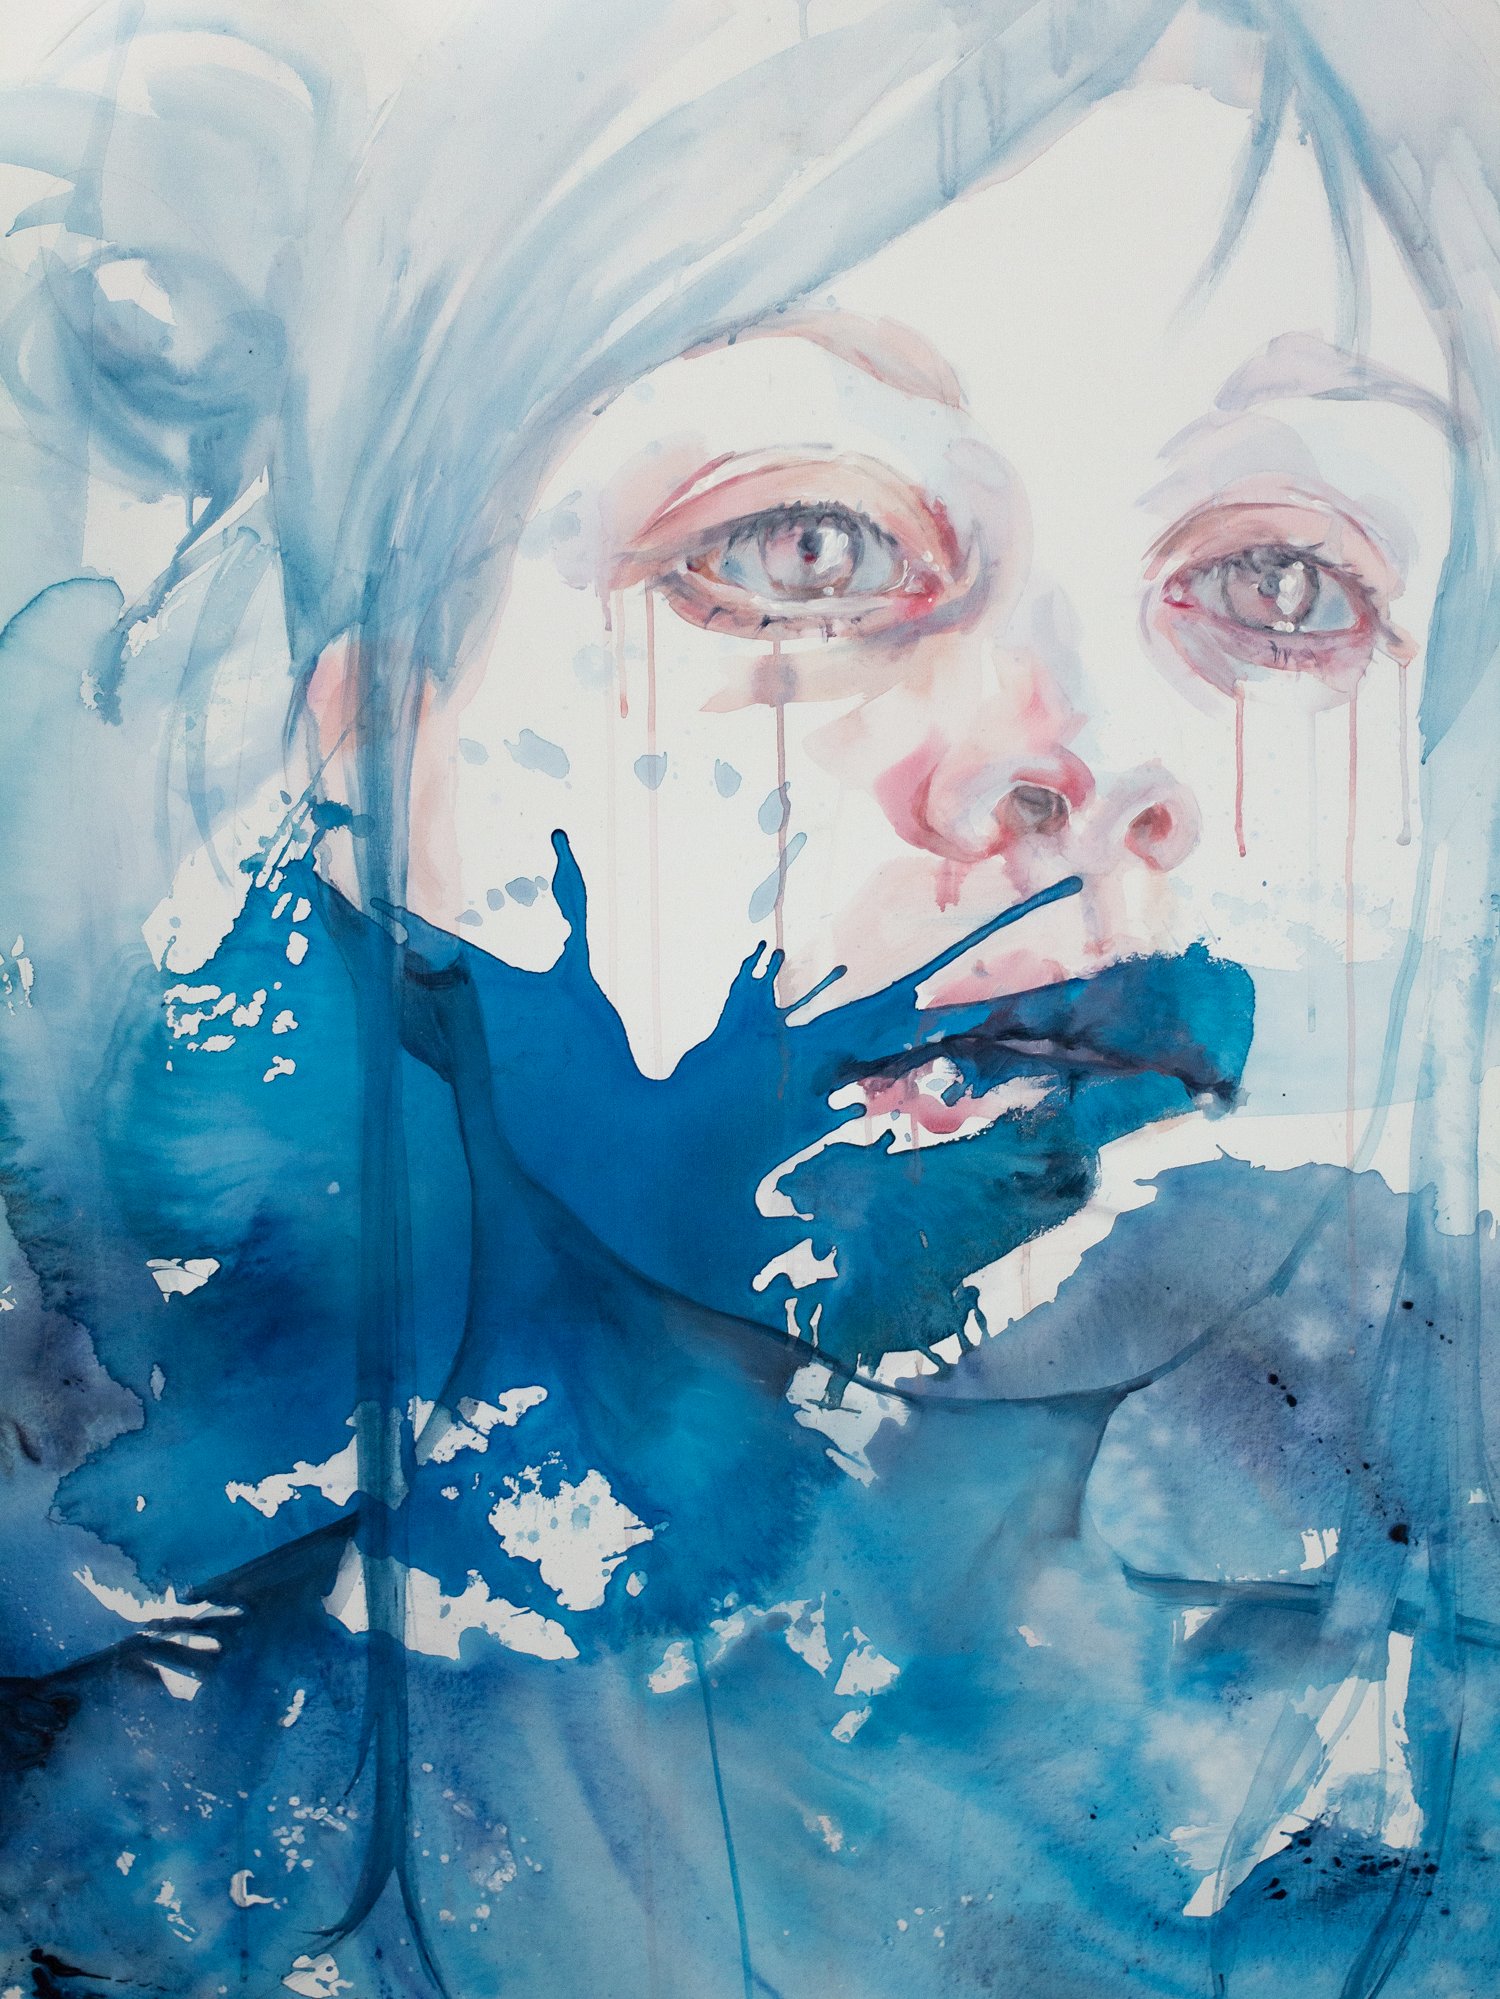 Agnes-Cecile wave upon wave, the sea brought me here (100x150 cm)